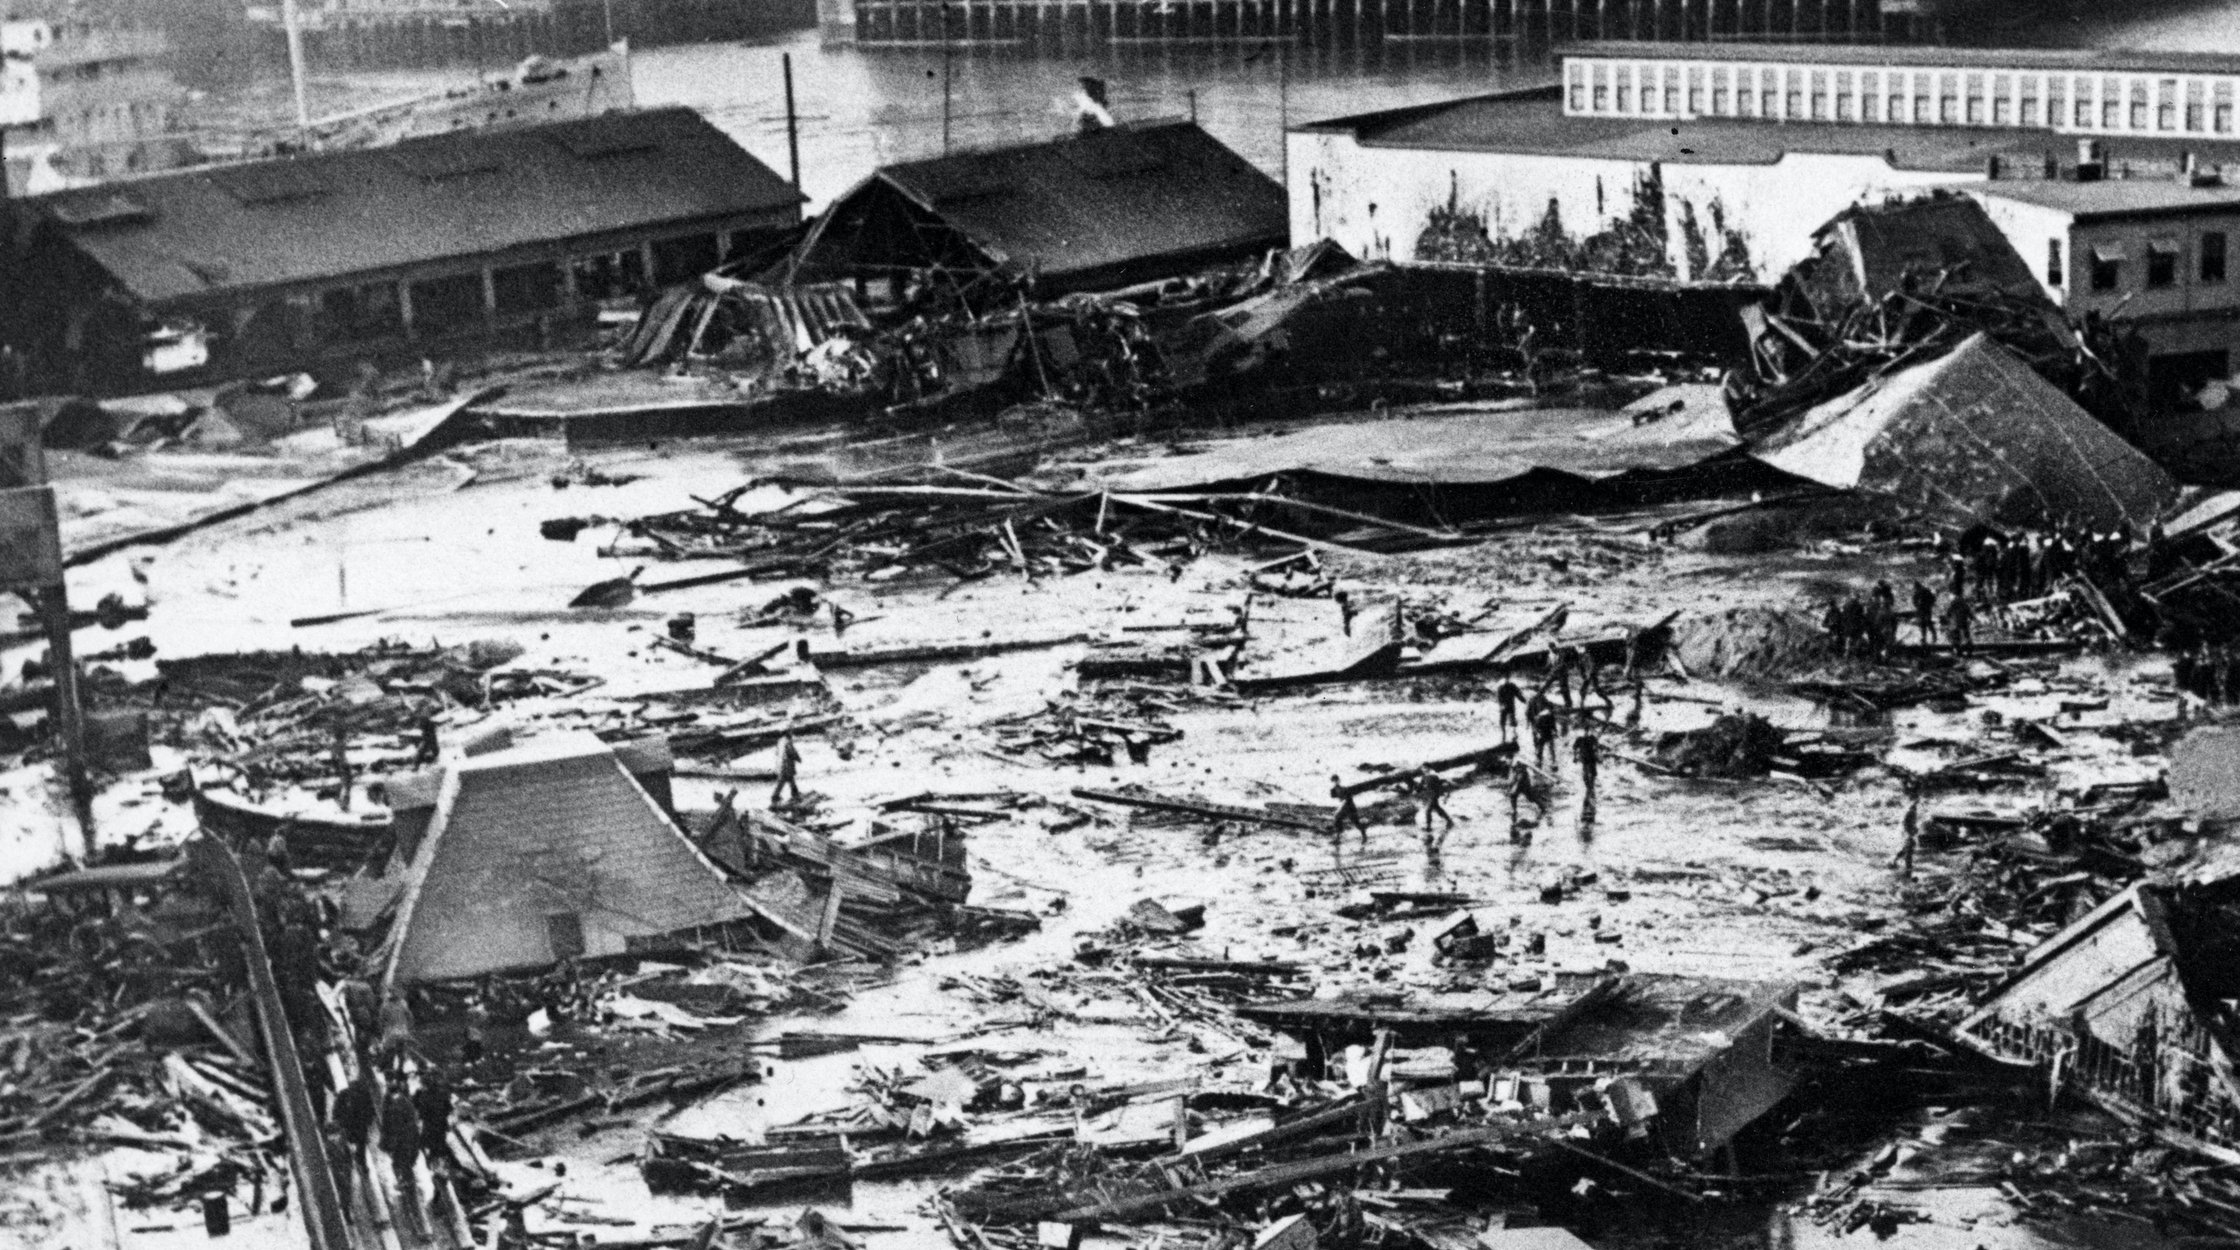 wreckage from the great molasses flood of 1919 in Boston